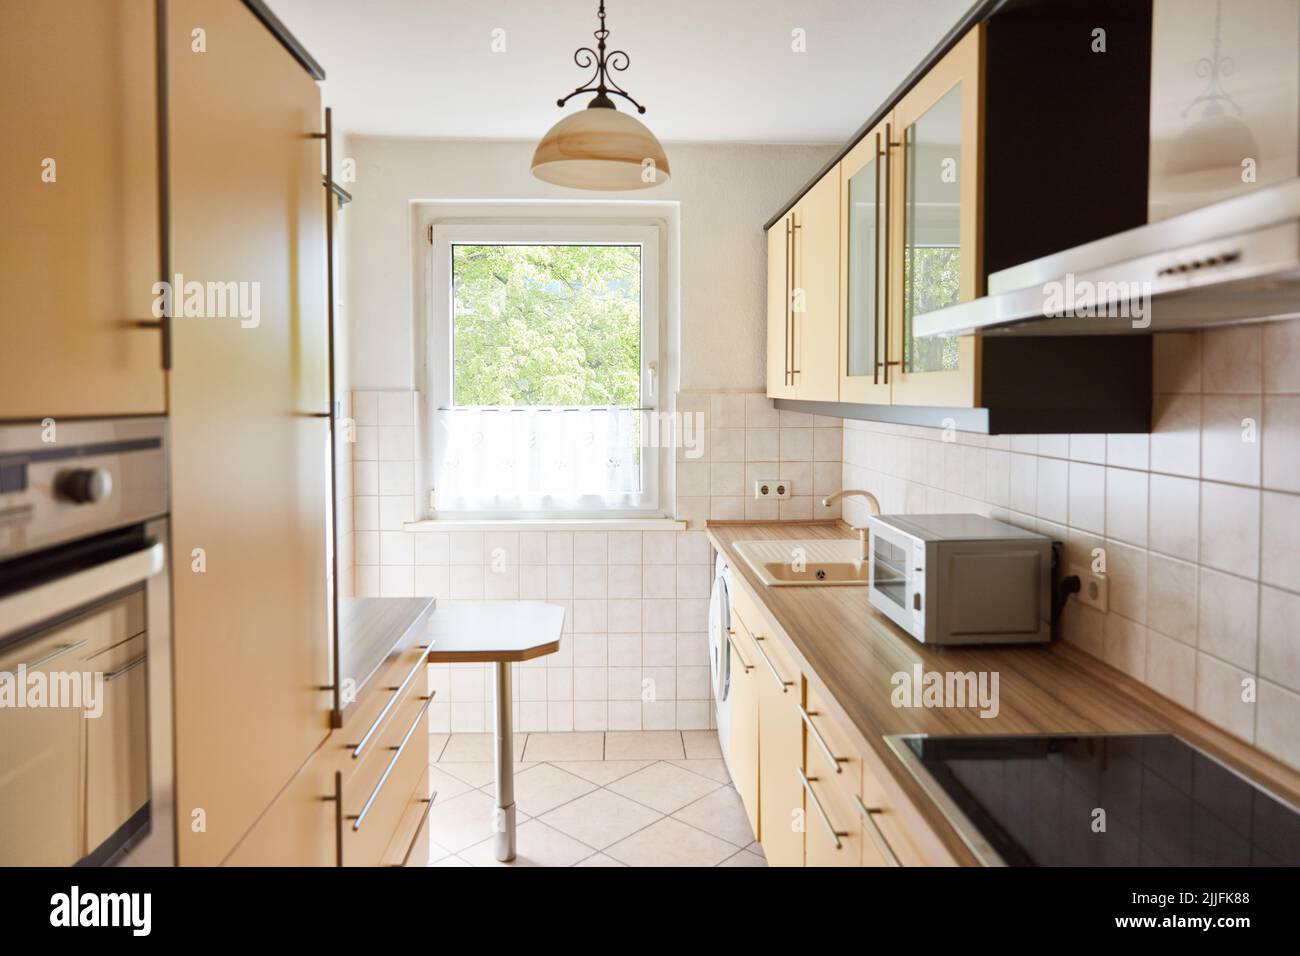 Kitchenette with a microwave in a small, bright kitchen with a window Stock Photo